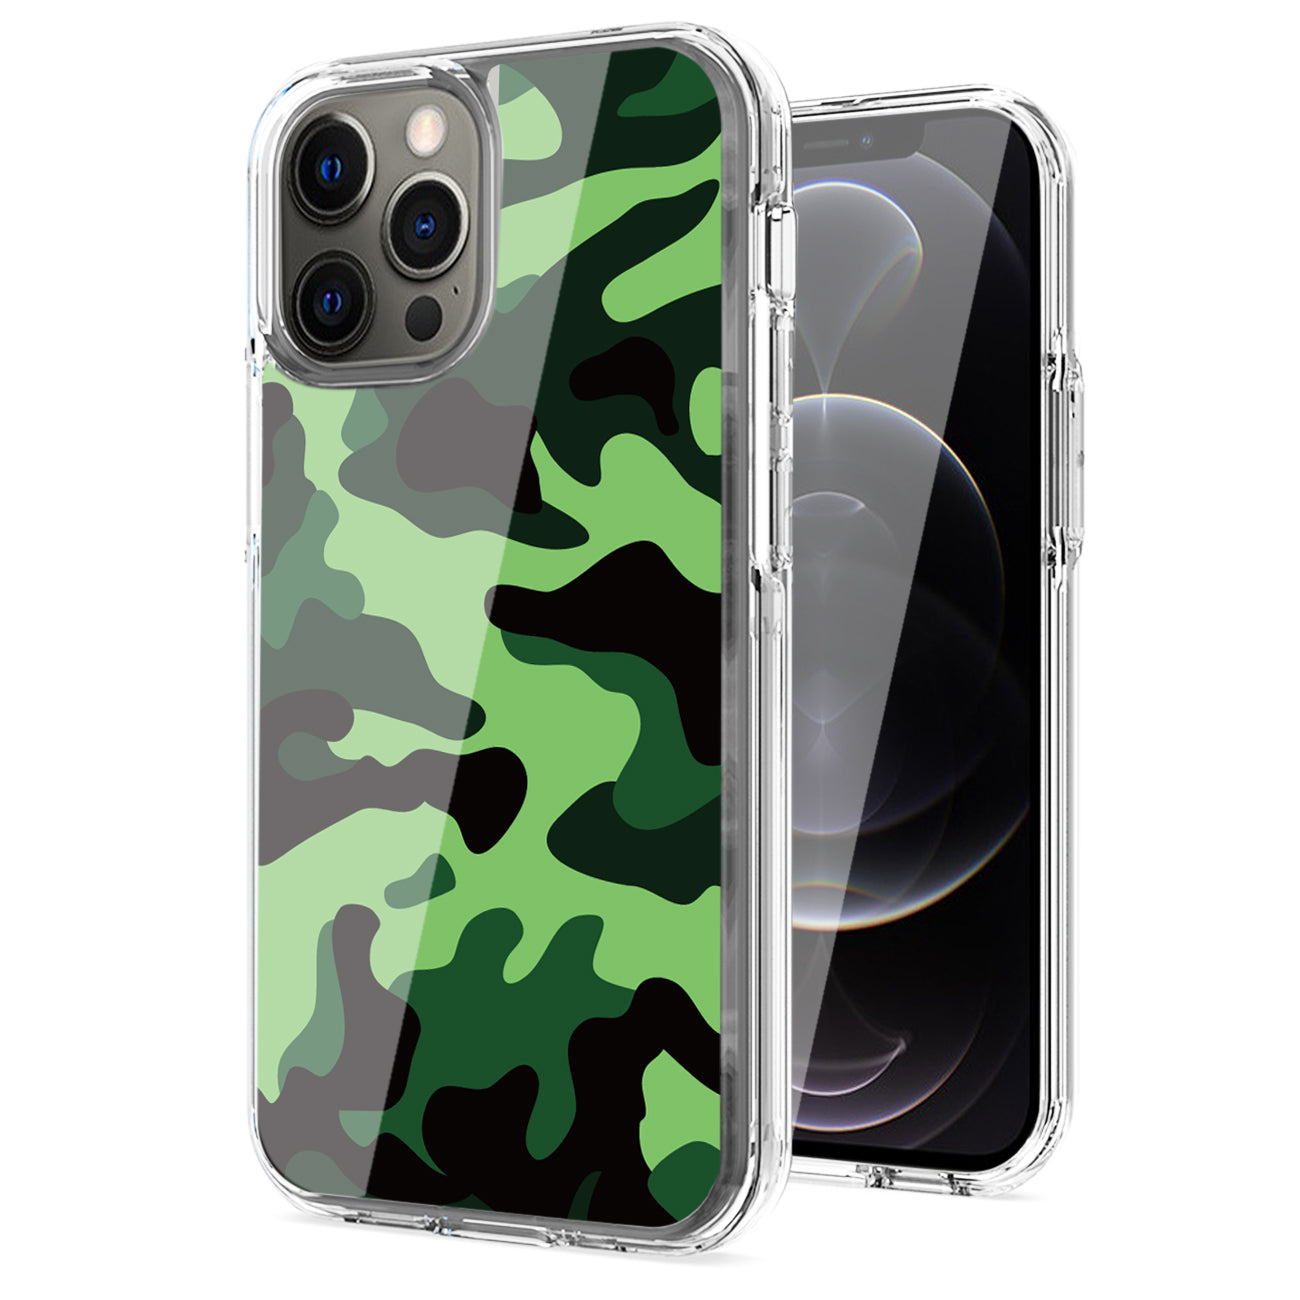 Camouflage Dual Layer Hybrid Hard & Soft TPU Rubber Case for IPH 12/IPH 12 PRO In Mint Green